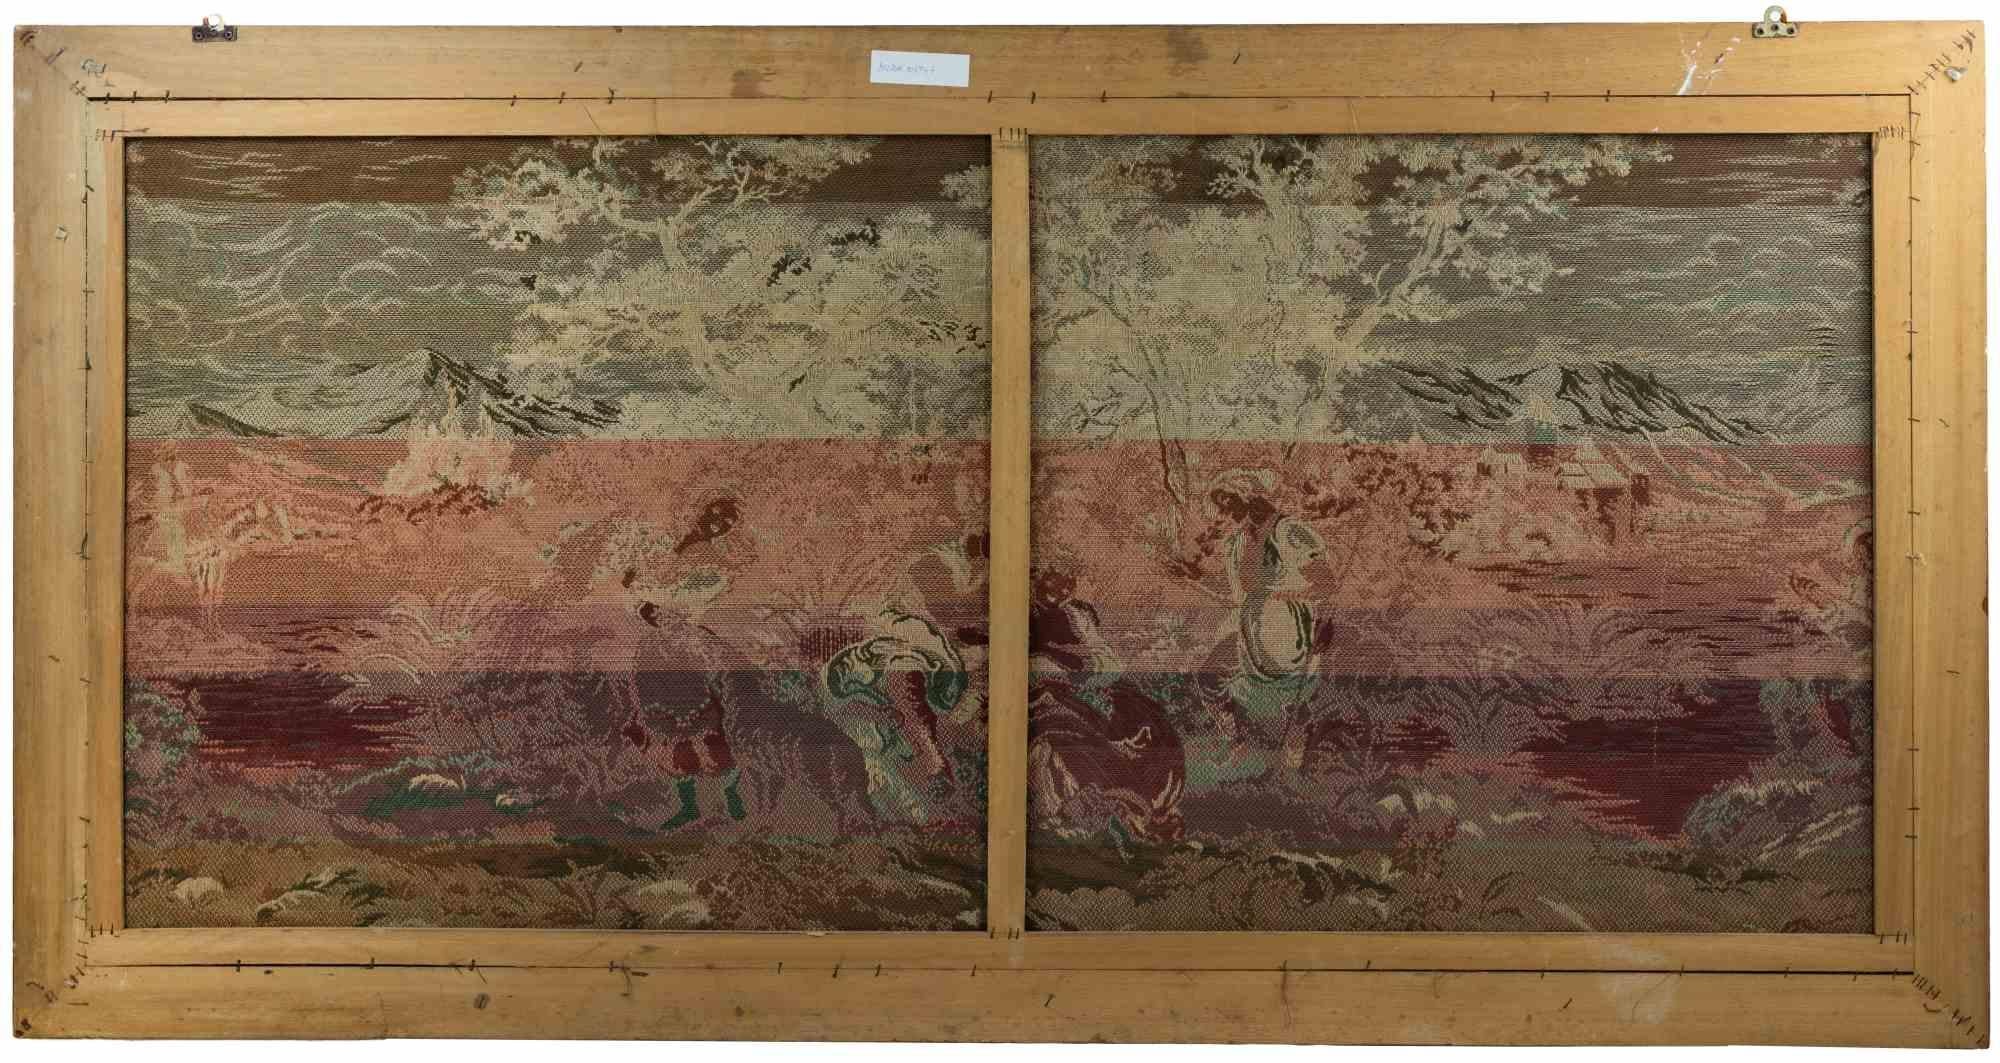 Bucolic Scene - Original Mixed Colored Tapestry - Early 20th century  - Modern Art by Jacques Bethand